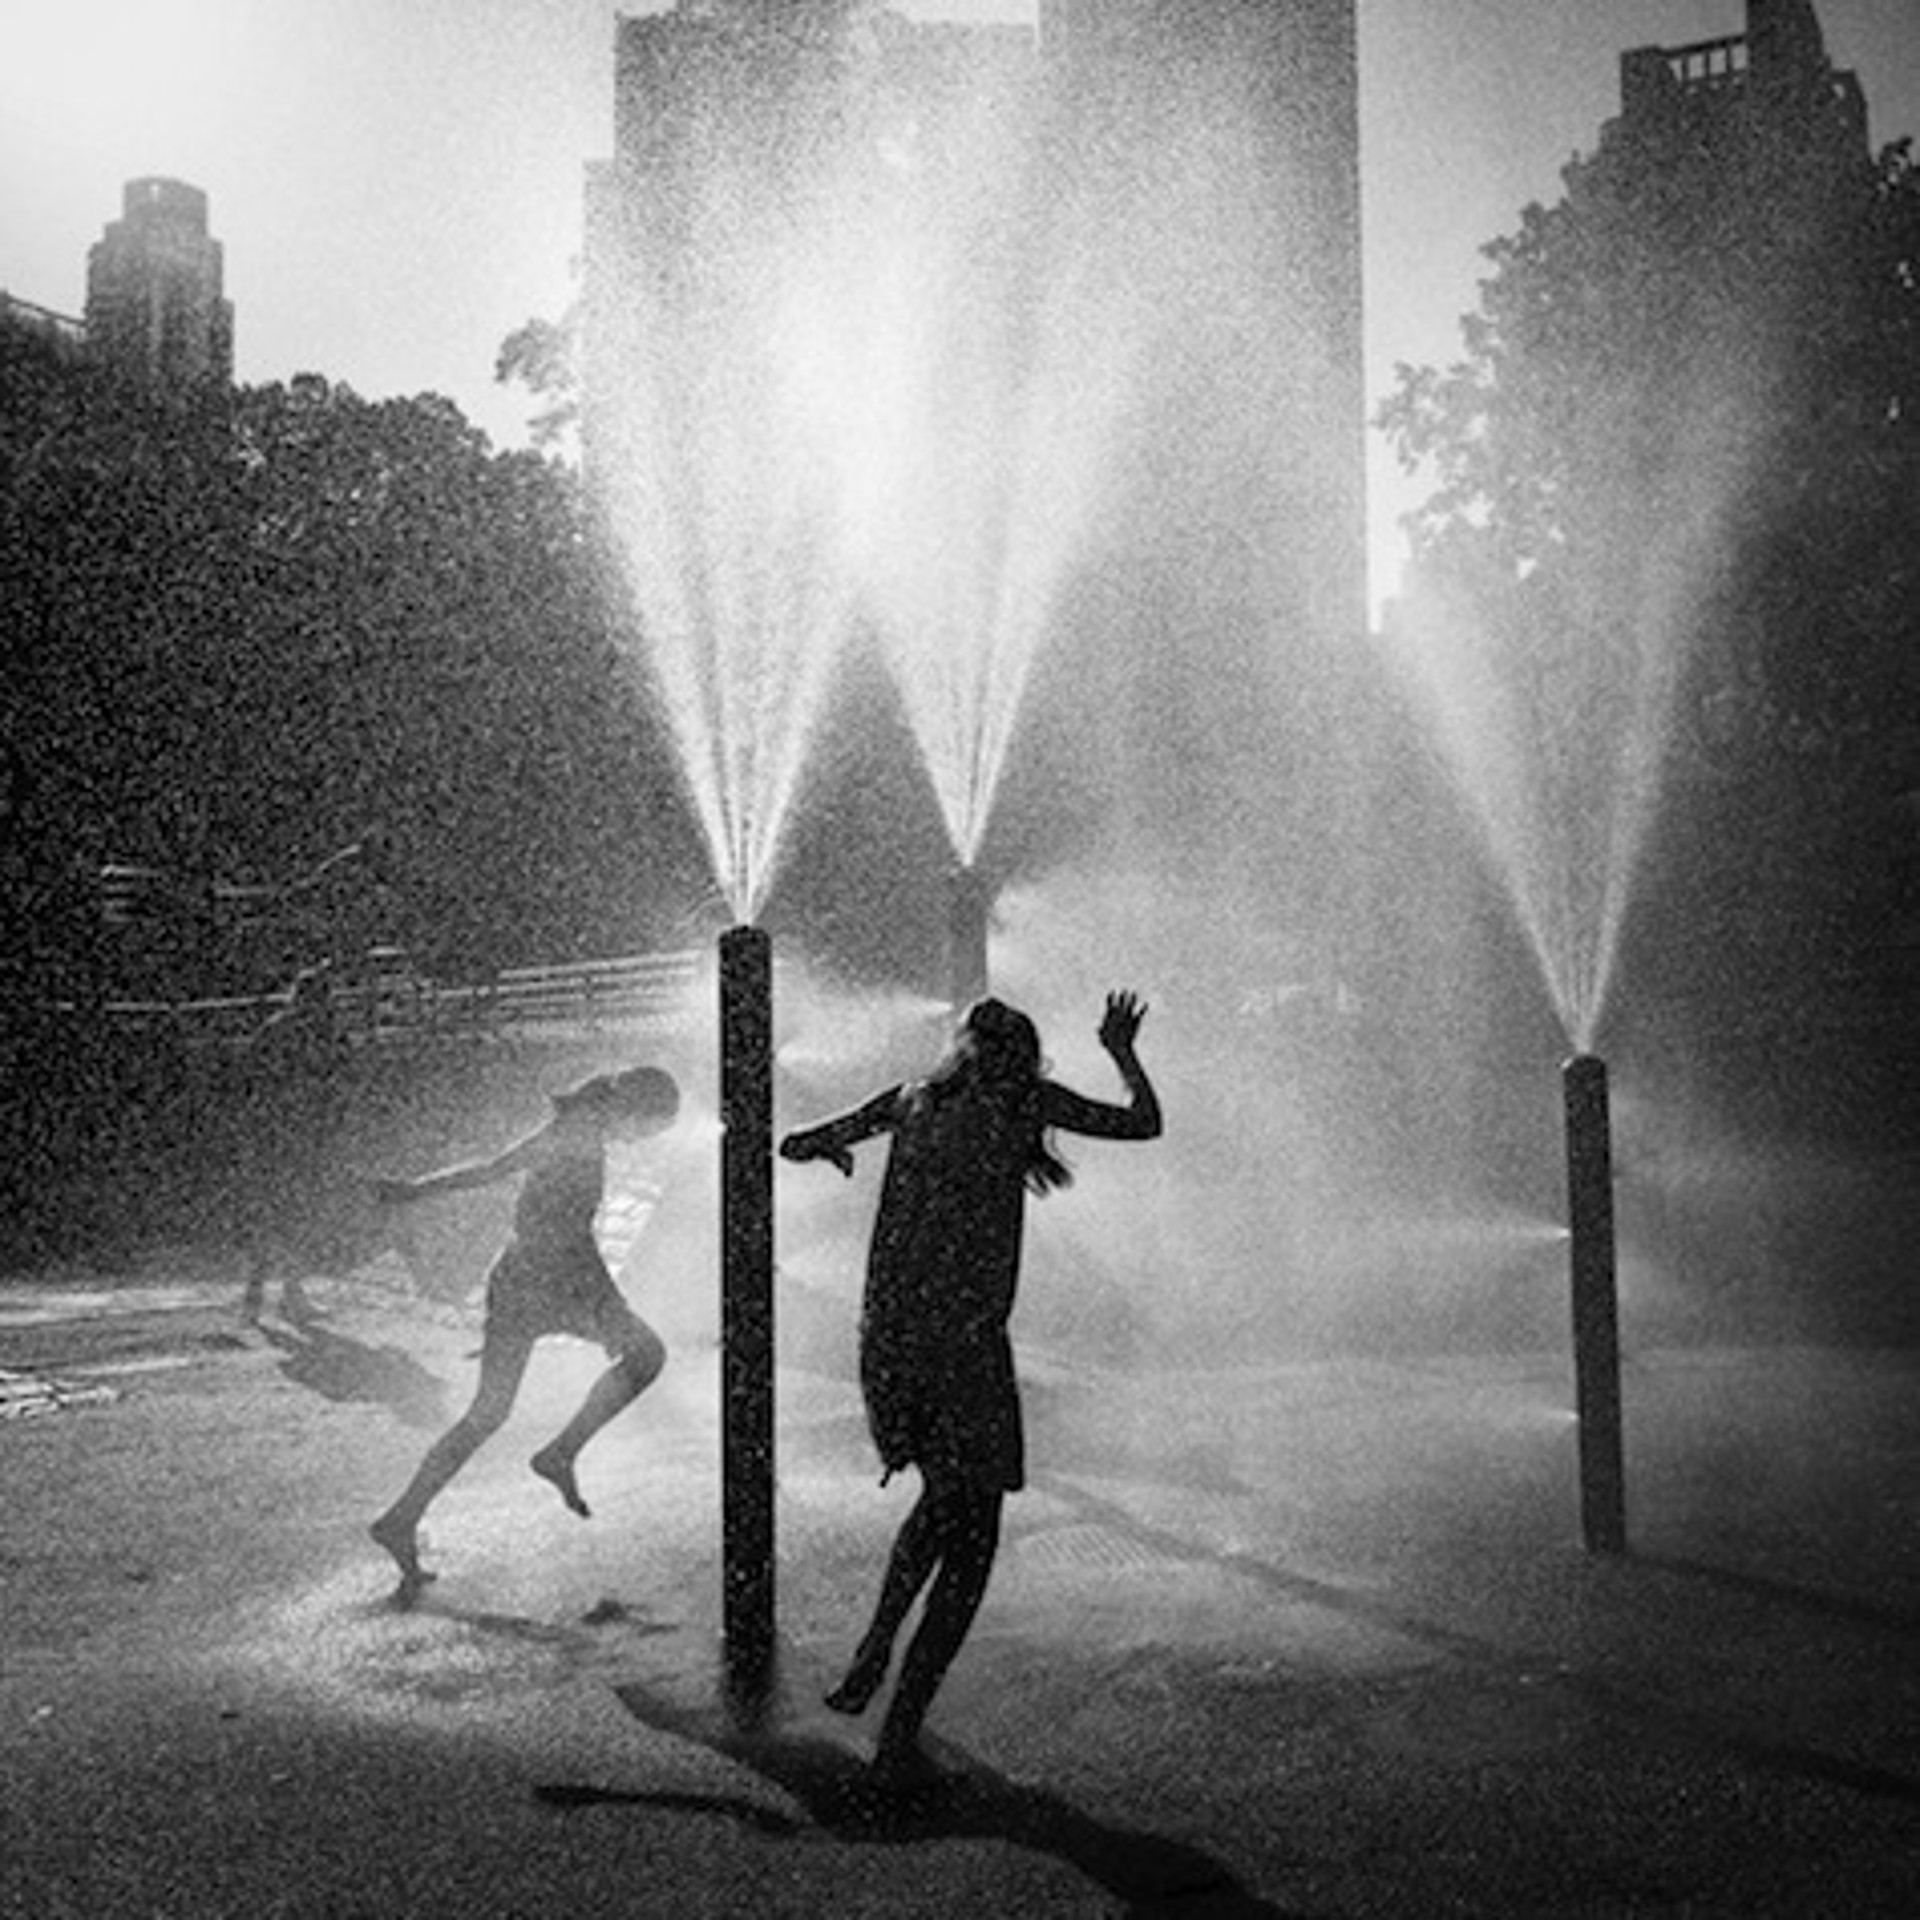 Simple Pleasures, Central Park, New York, NY by Peter Mendelson